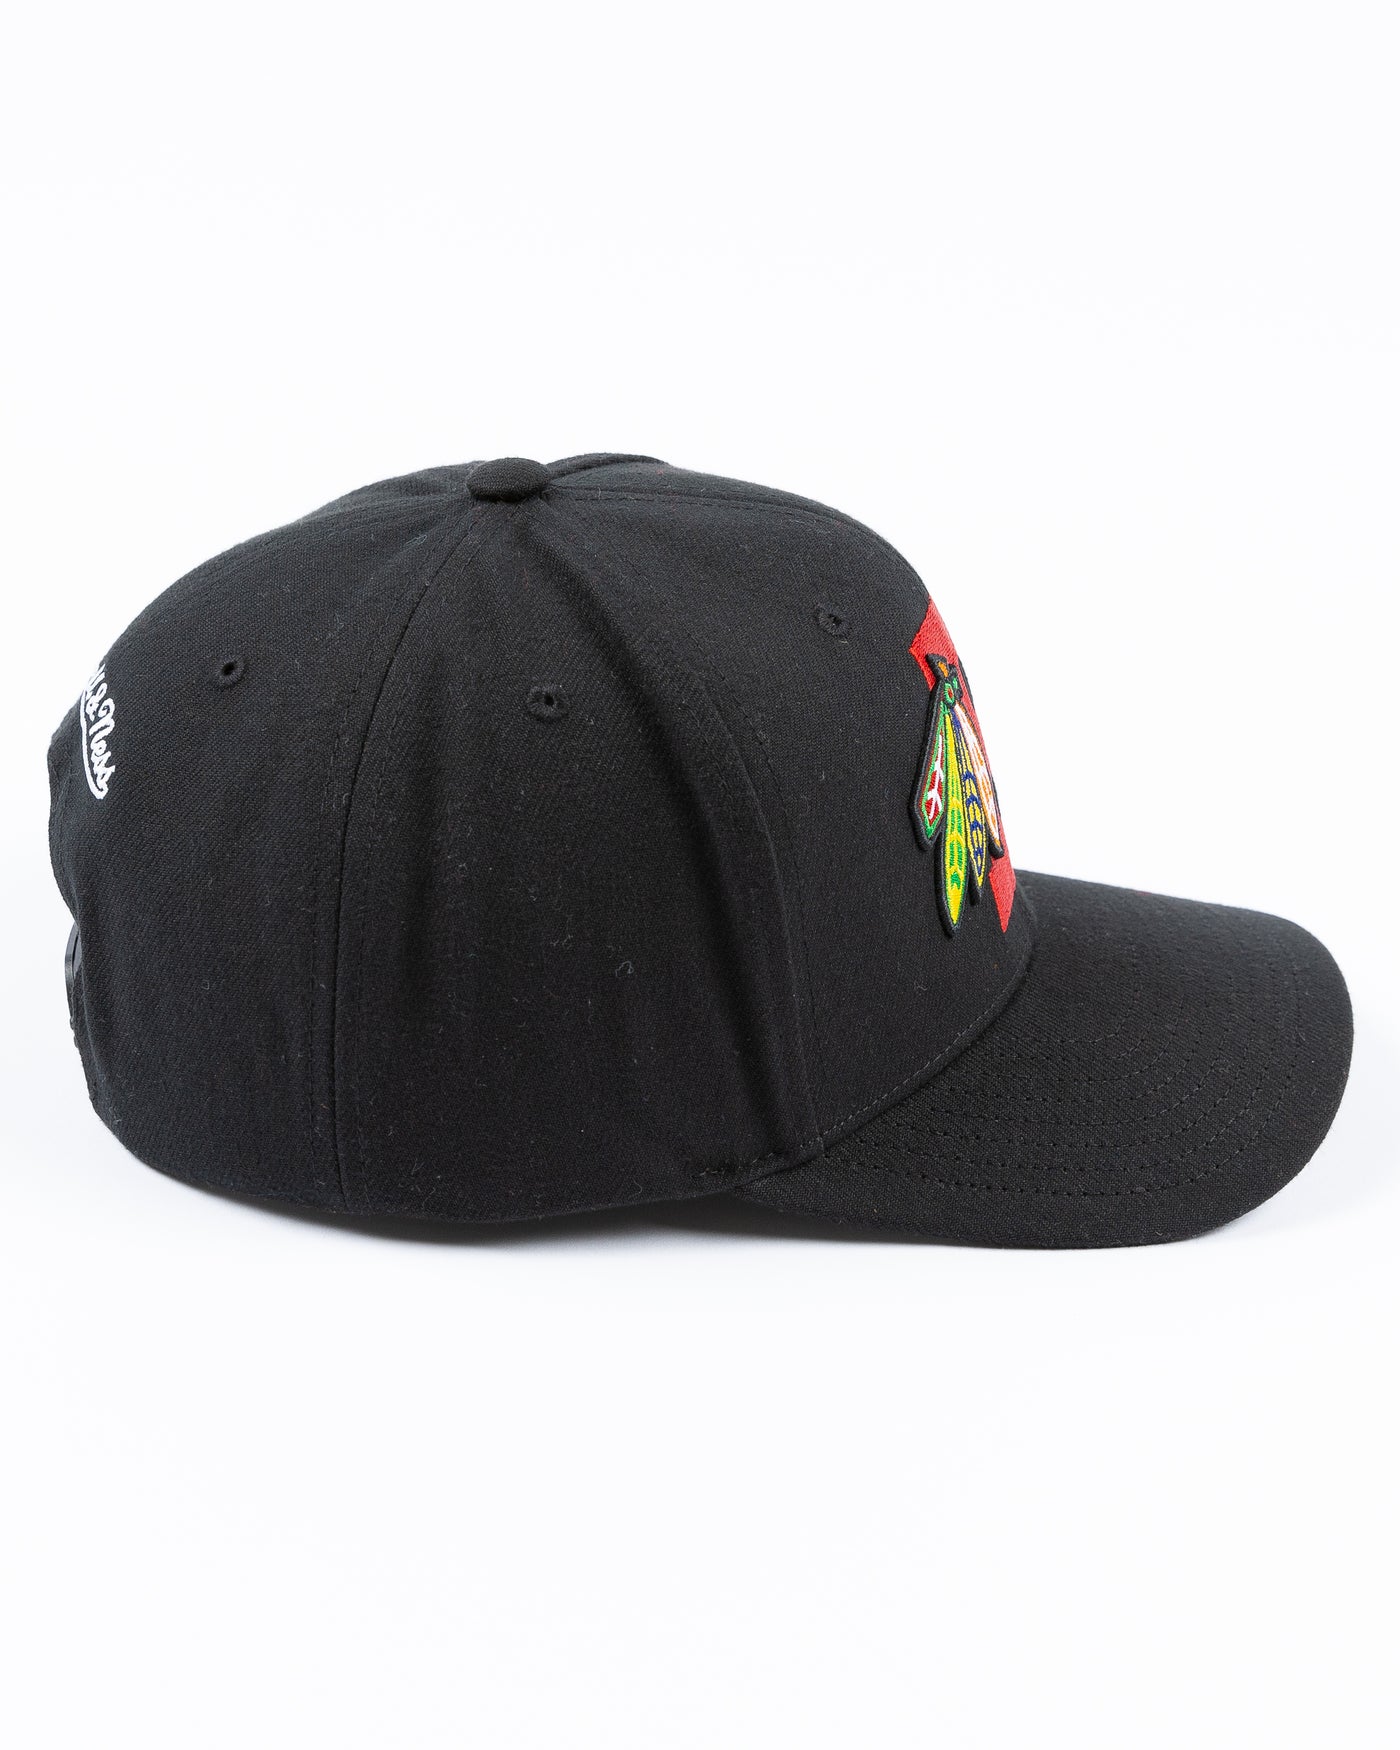 black Mitchell & Ness snapback with Chicago Blackhawks four feathers logo embroidered on red letter B - right side lay flat